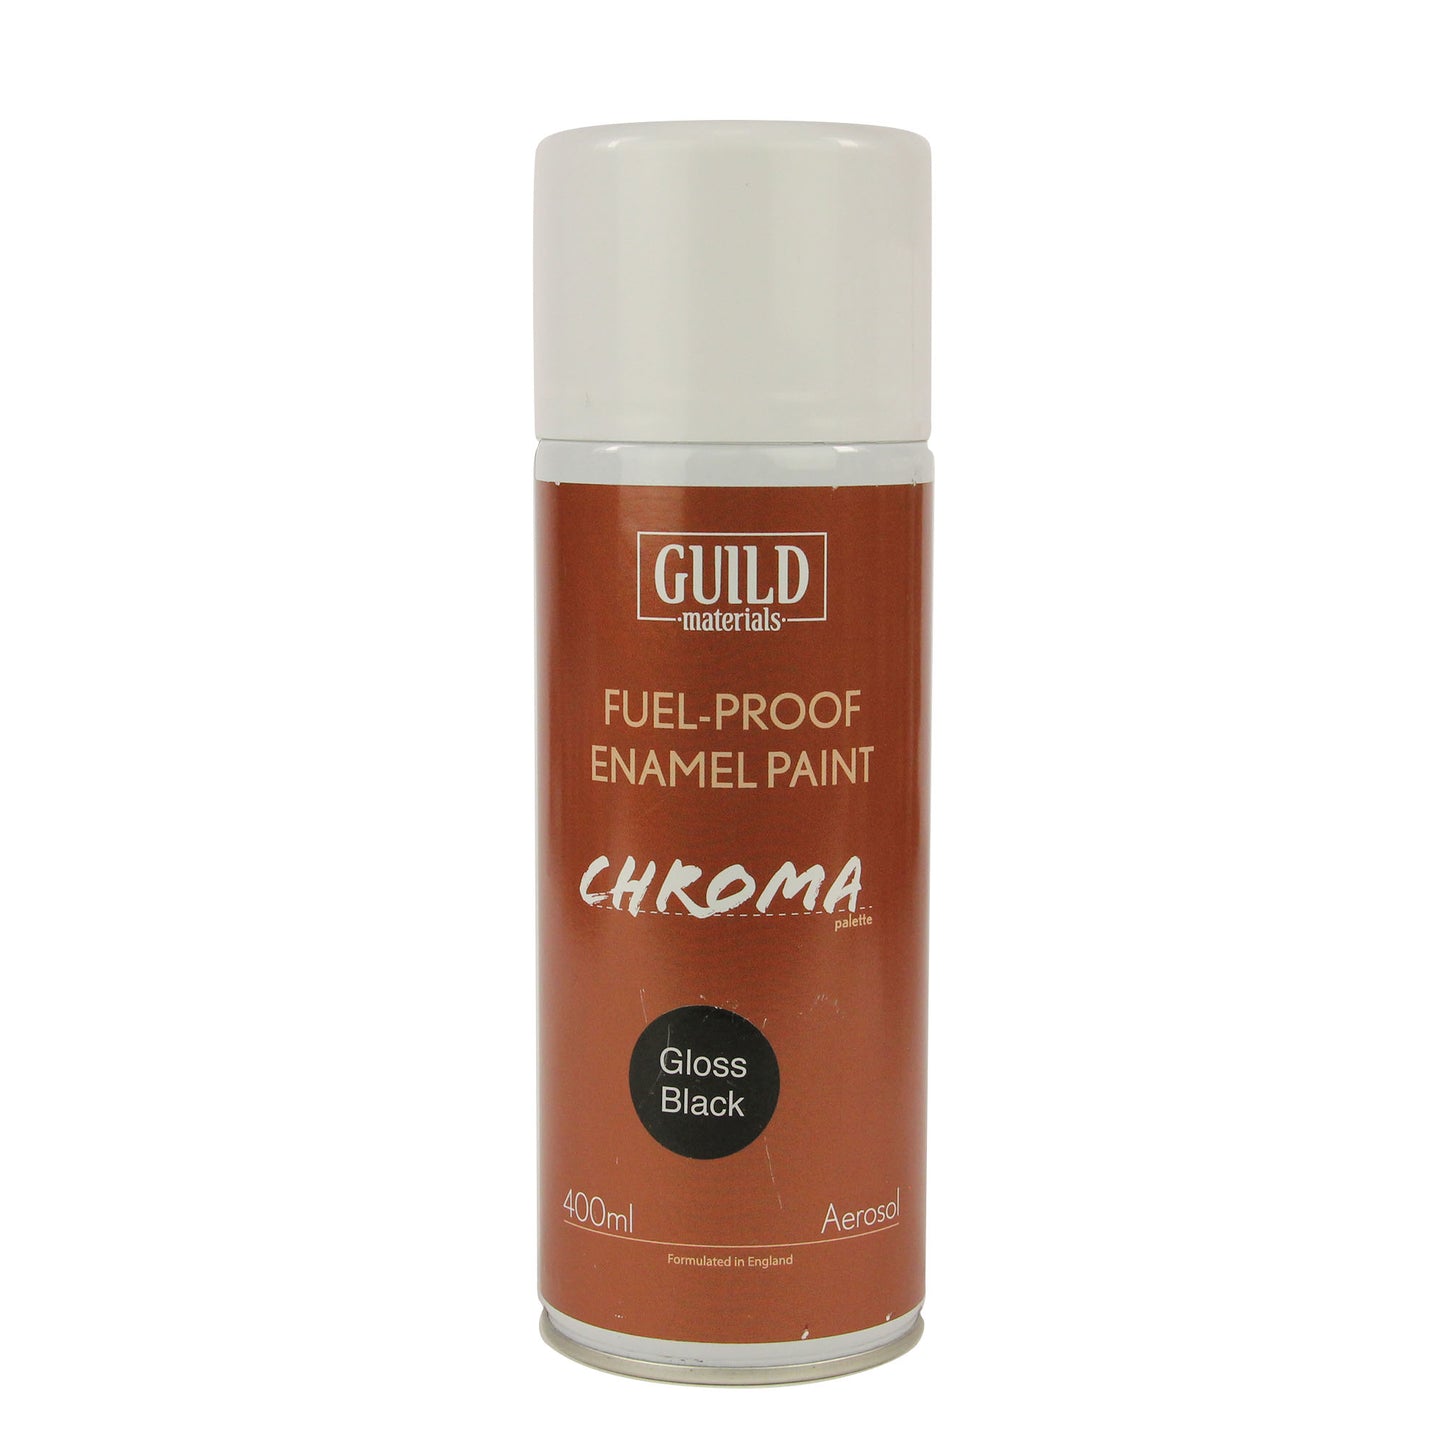 Load image into Gallery viewer, Chroma Enamel Fuelproof Paint Gloss Black (400ml Aerosol)
